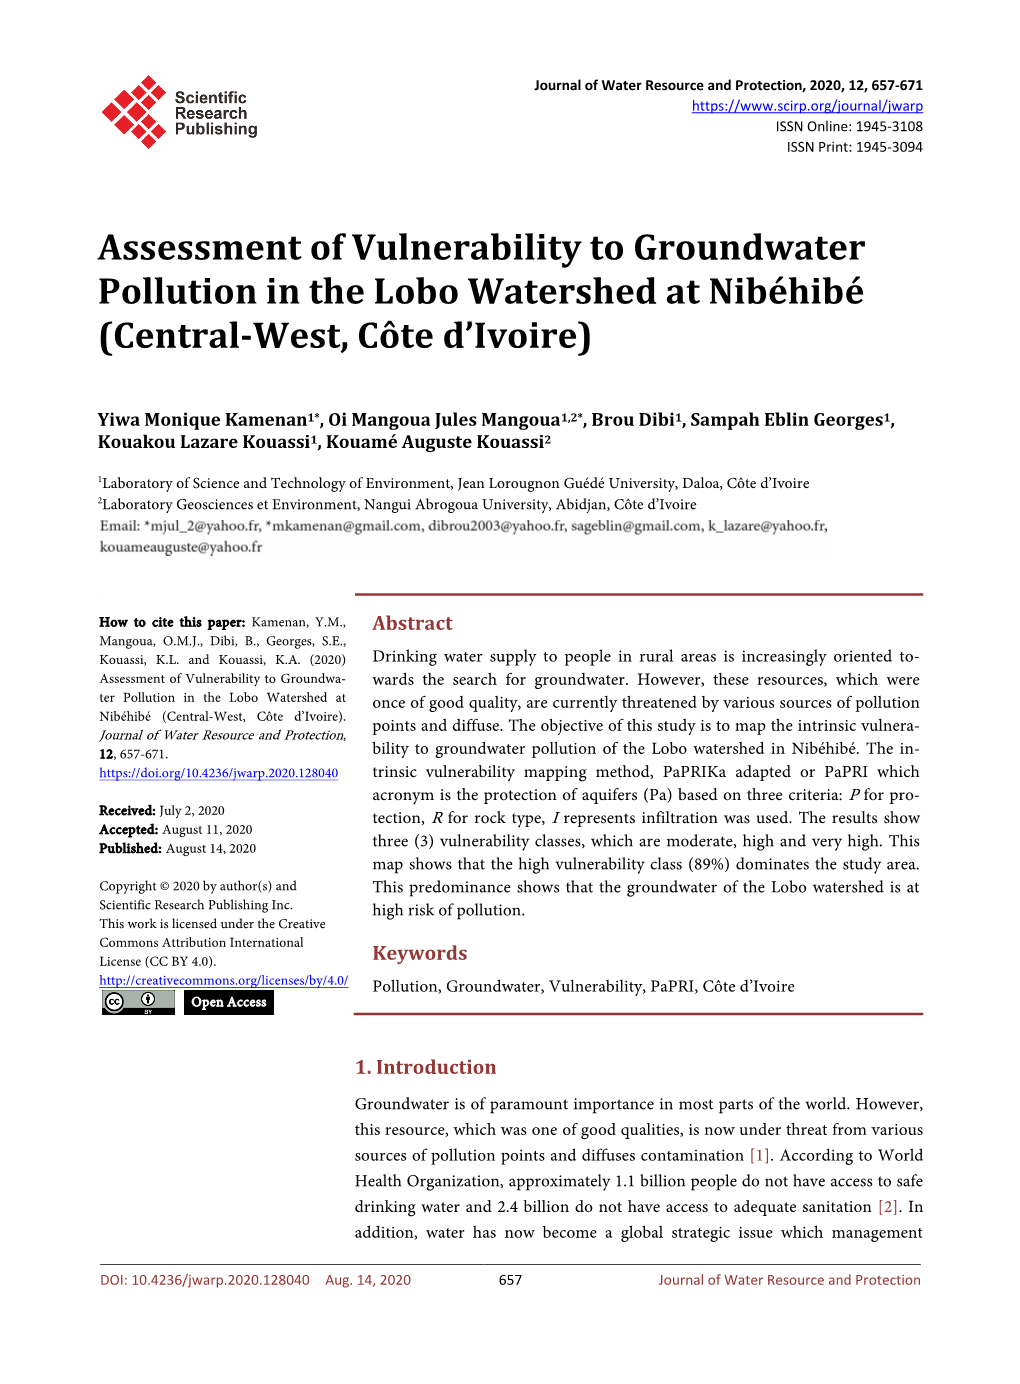 Assessment of Vulnerability to Groundwater Pollution in the Lobo Watershed at Nibéhibé (Central-West, Côte D’Ivoire)